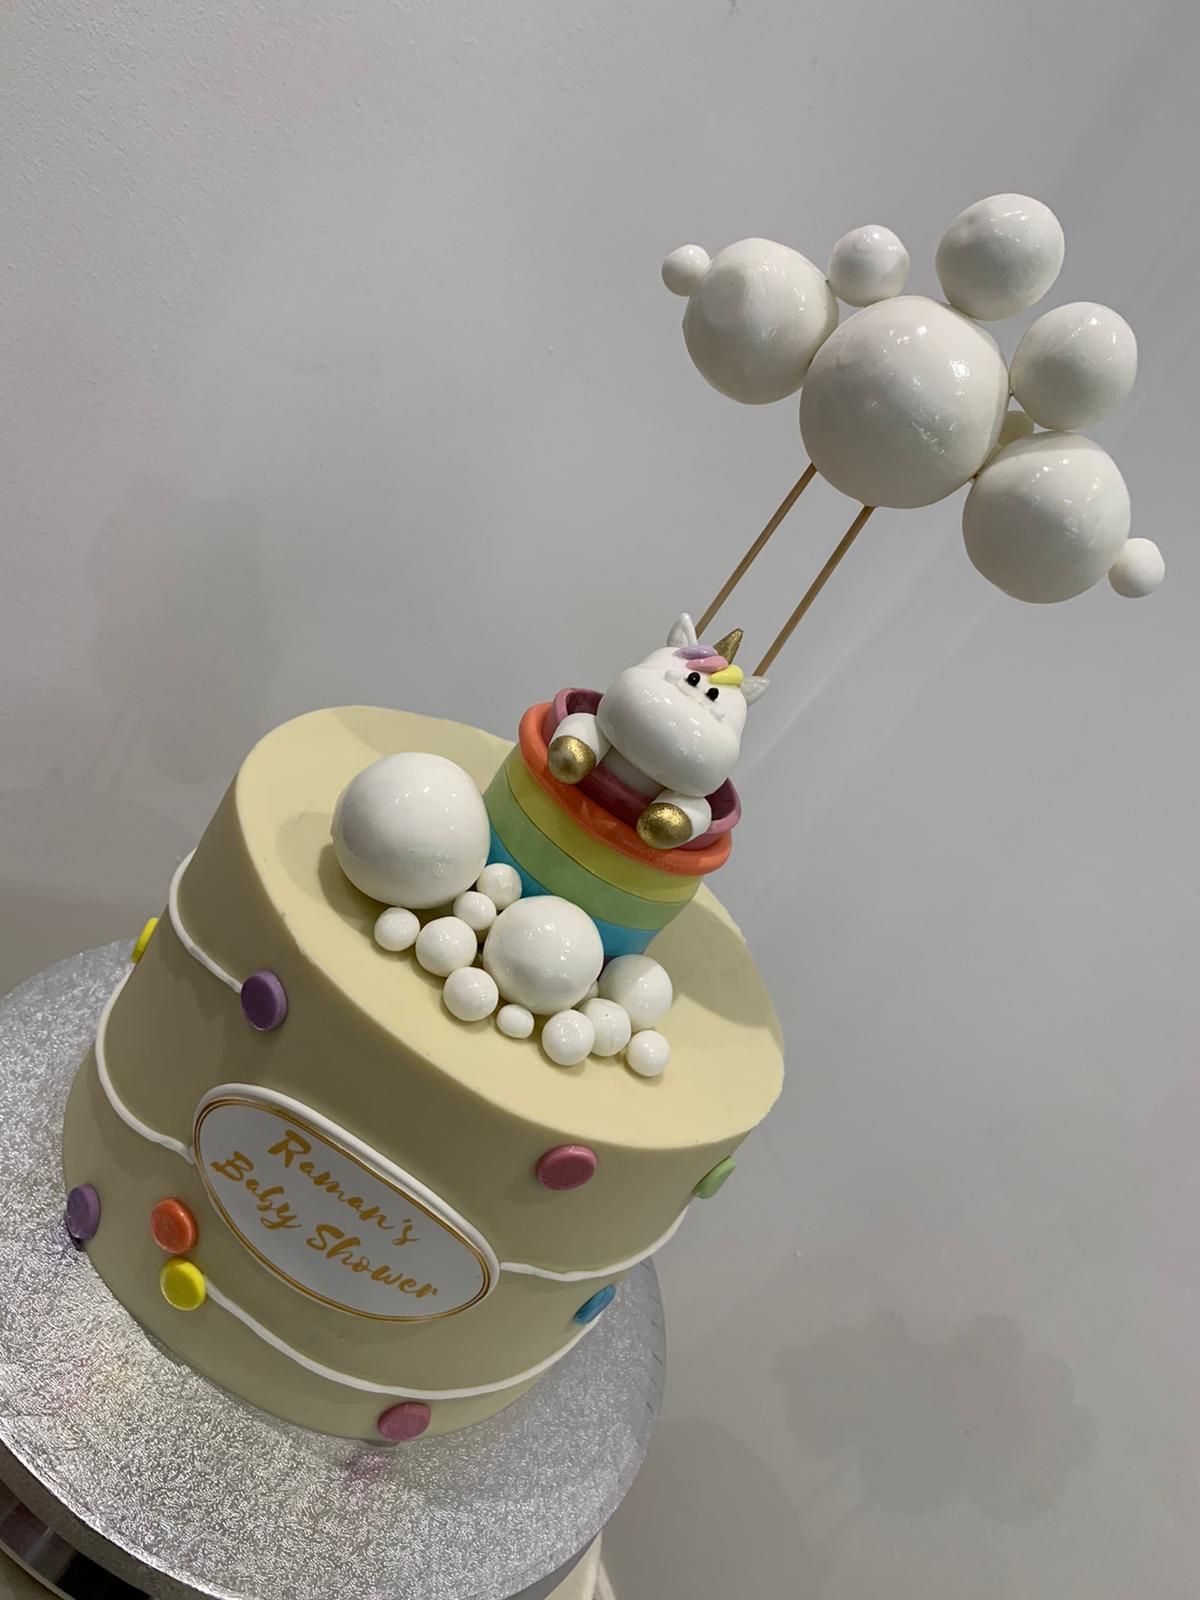 Blue sky with rainbow, clouds and age birthday cake design | Cake designs  birthday, Yummy cakes, Cake shop